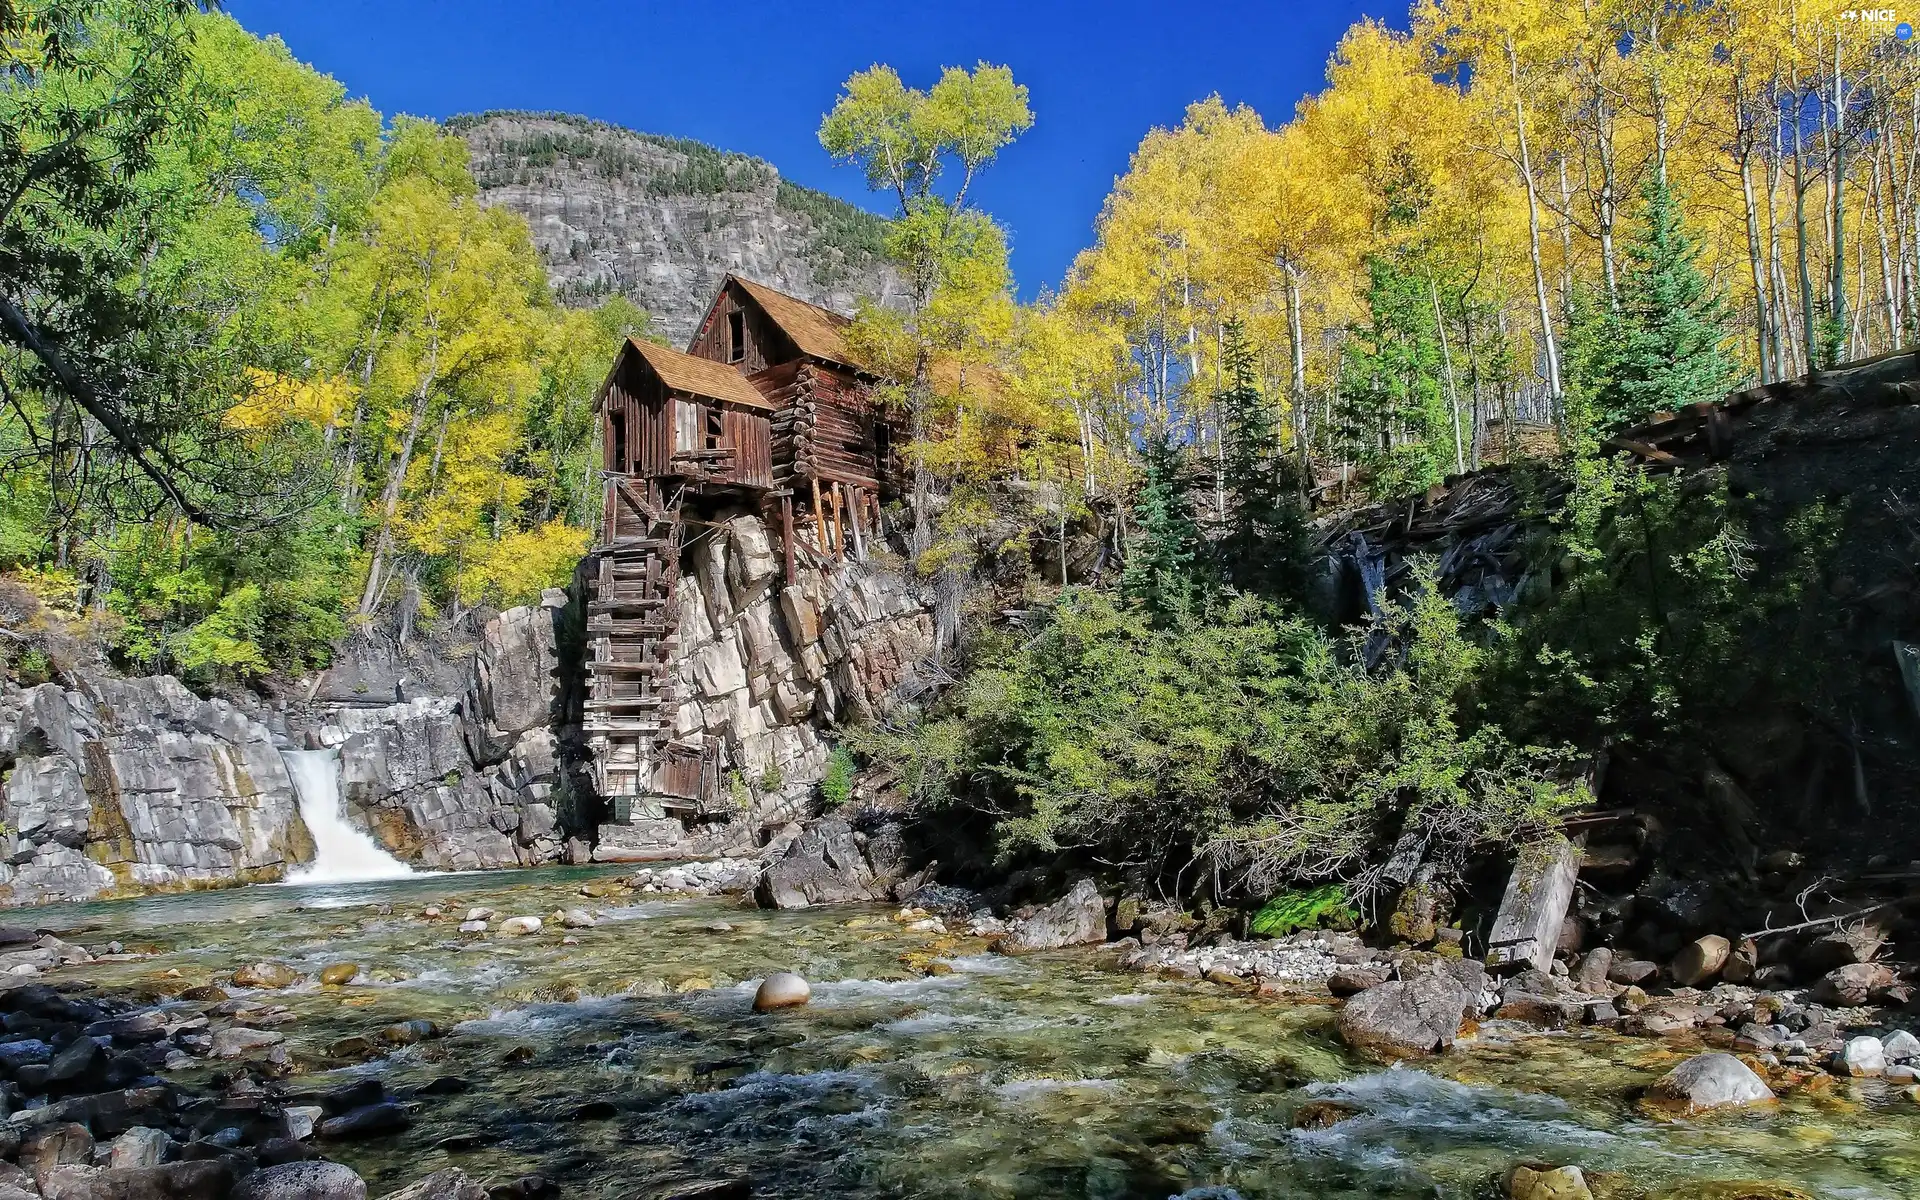 viewes, River, wooden, Home, rocks, trees